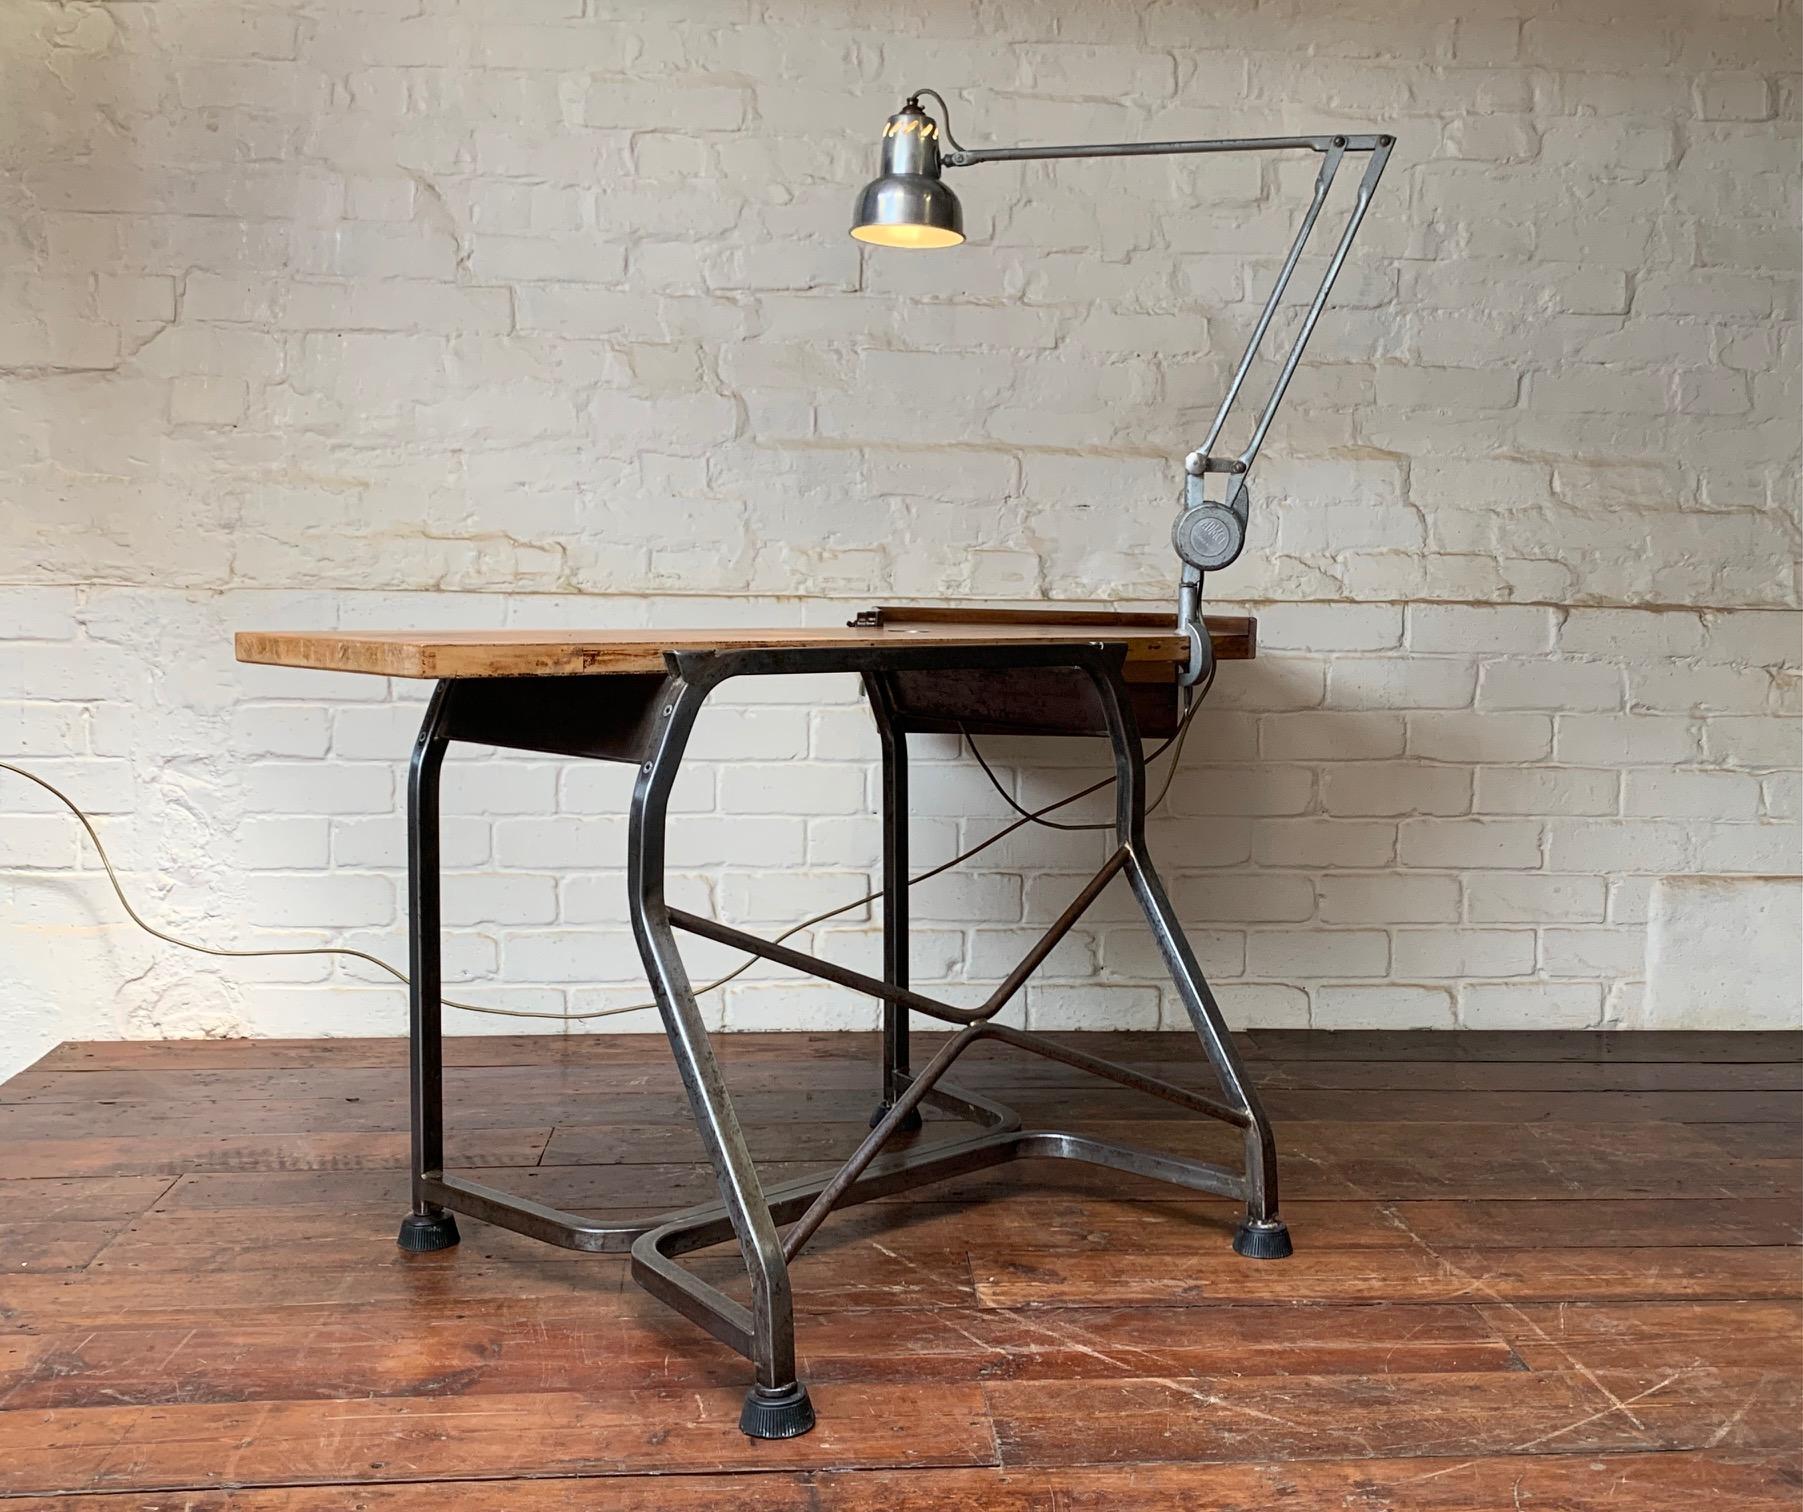 French A Stylish and Unique Bauhaus Meets Industrial Desk, Circa 1940's/50's